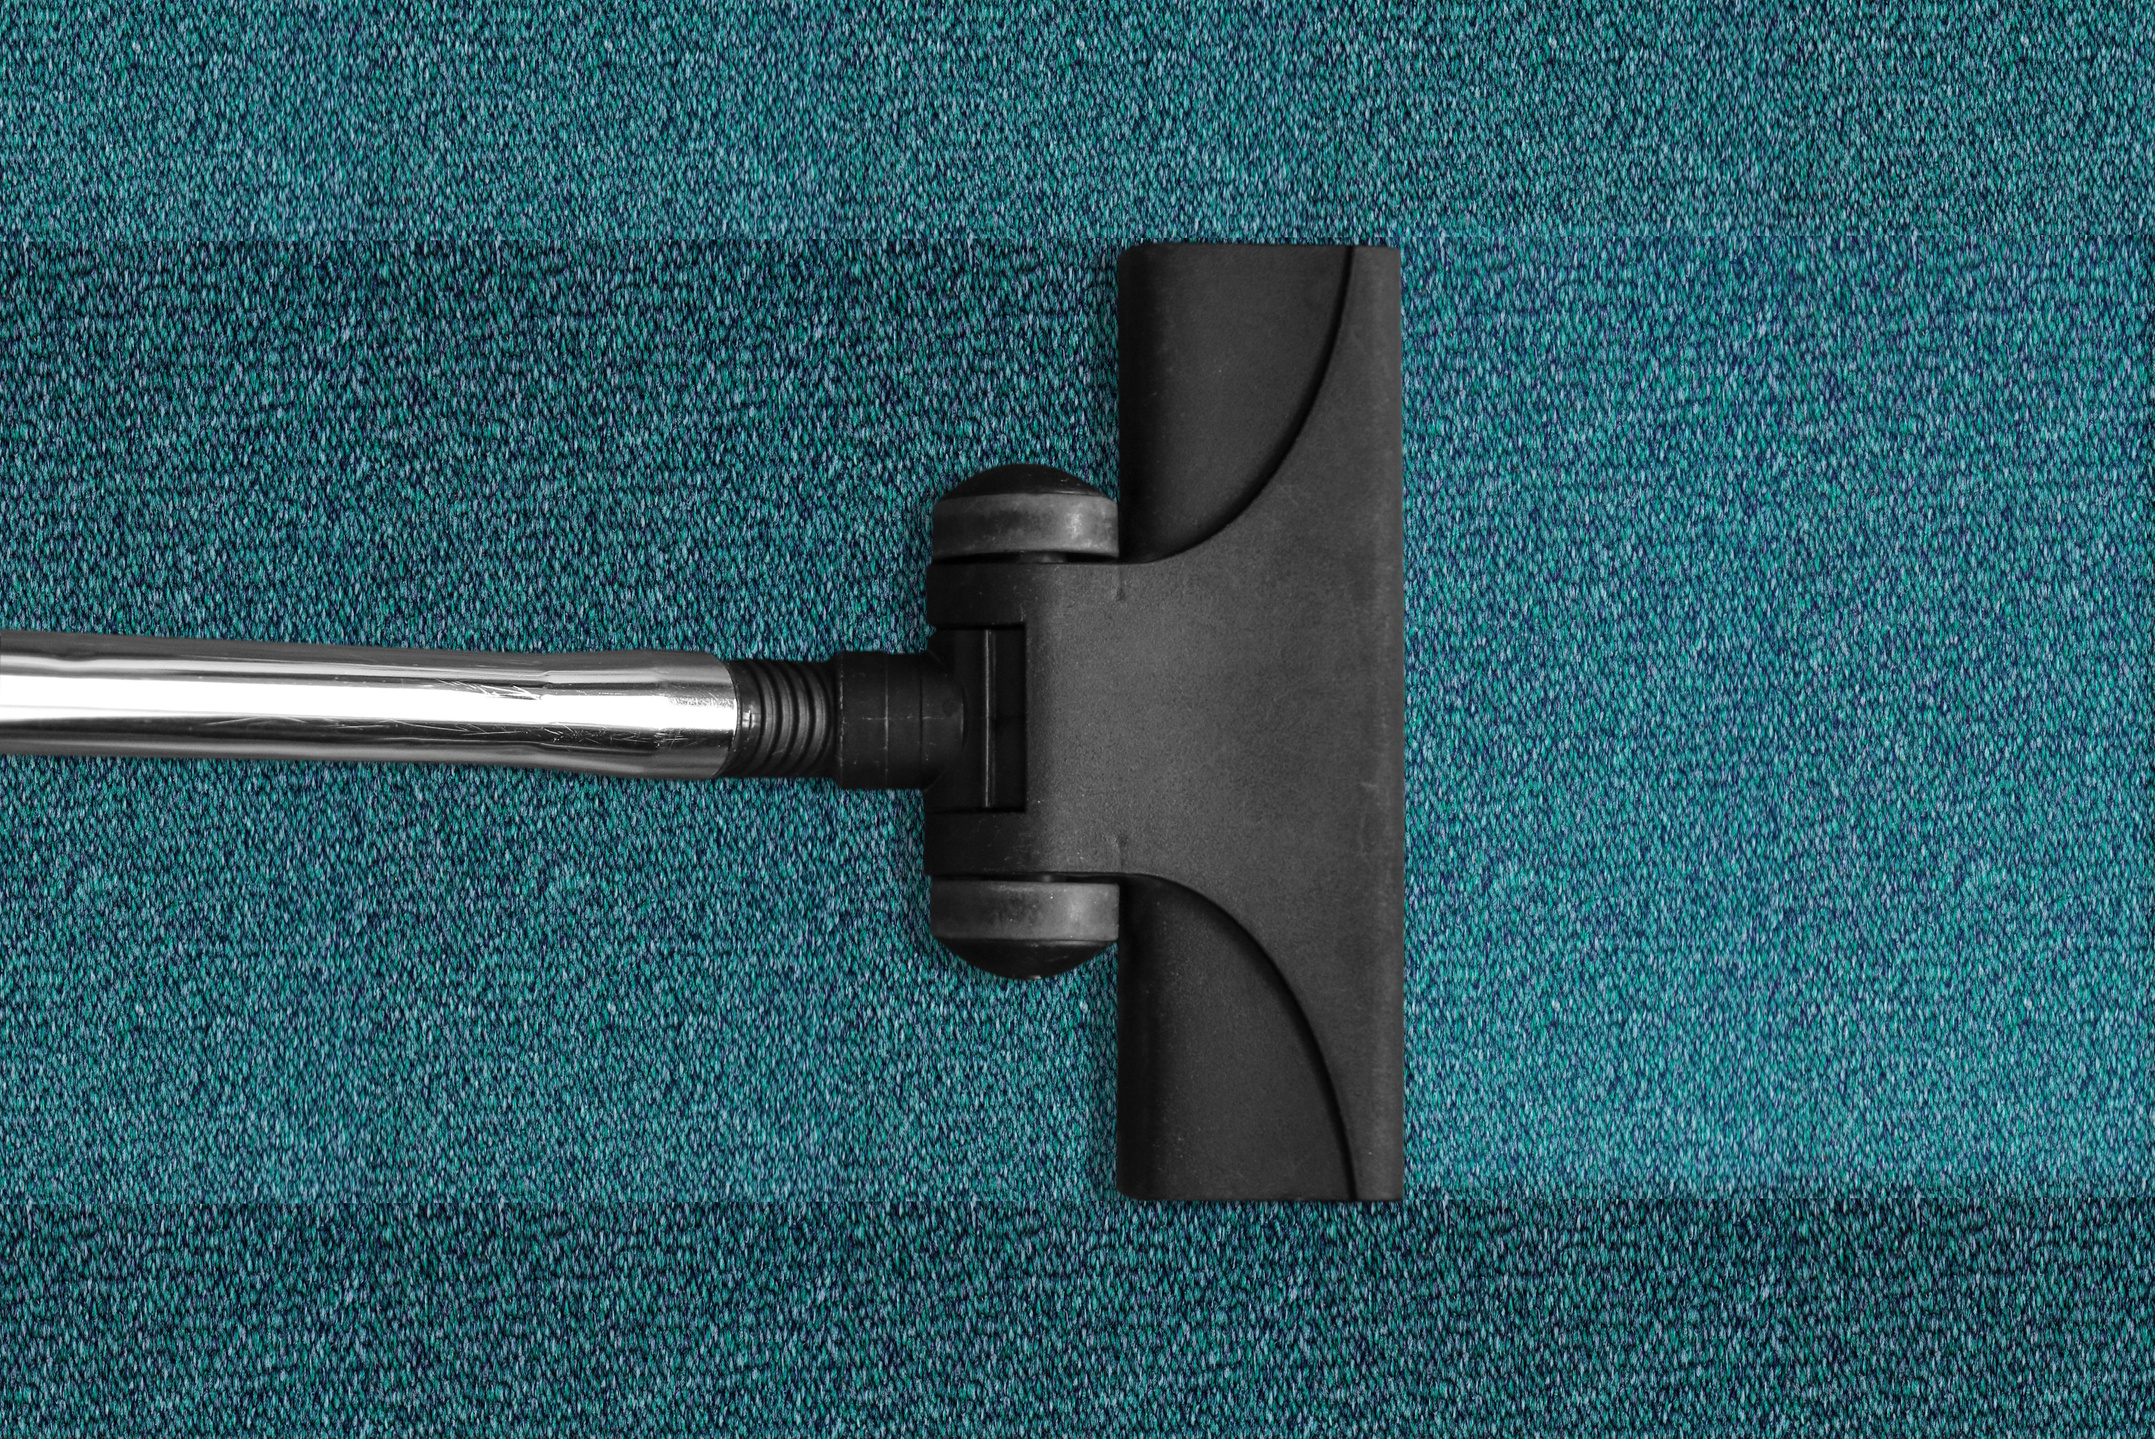 Top View of a Vacuum Cleaner Cleaning a Carpet